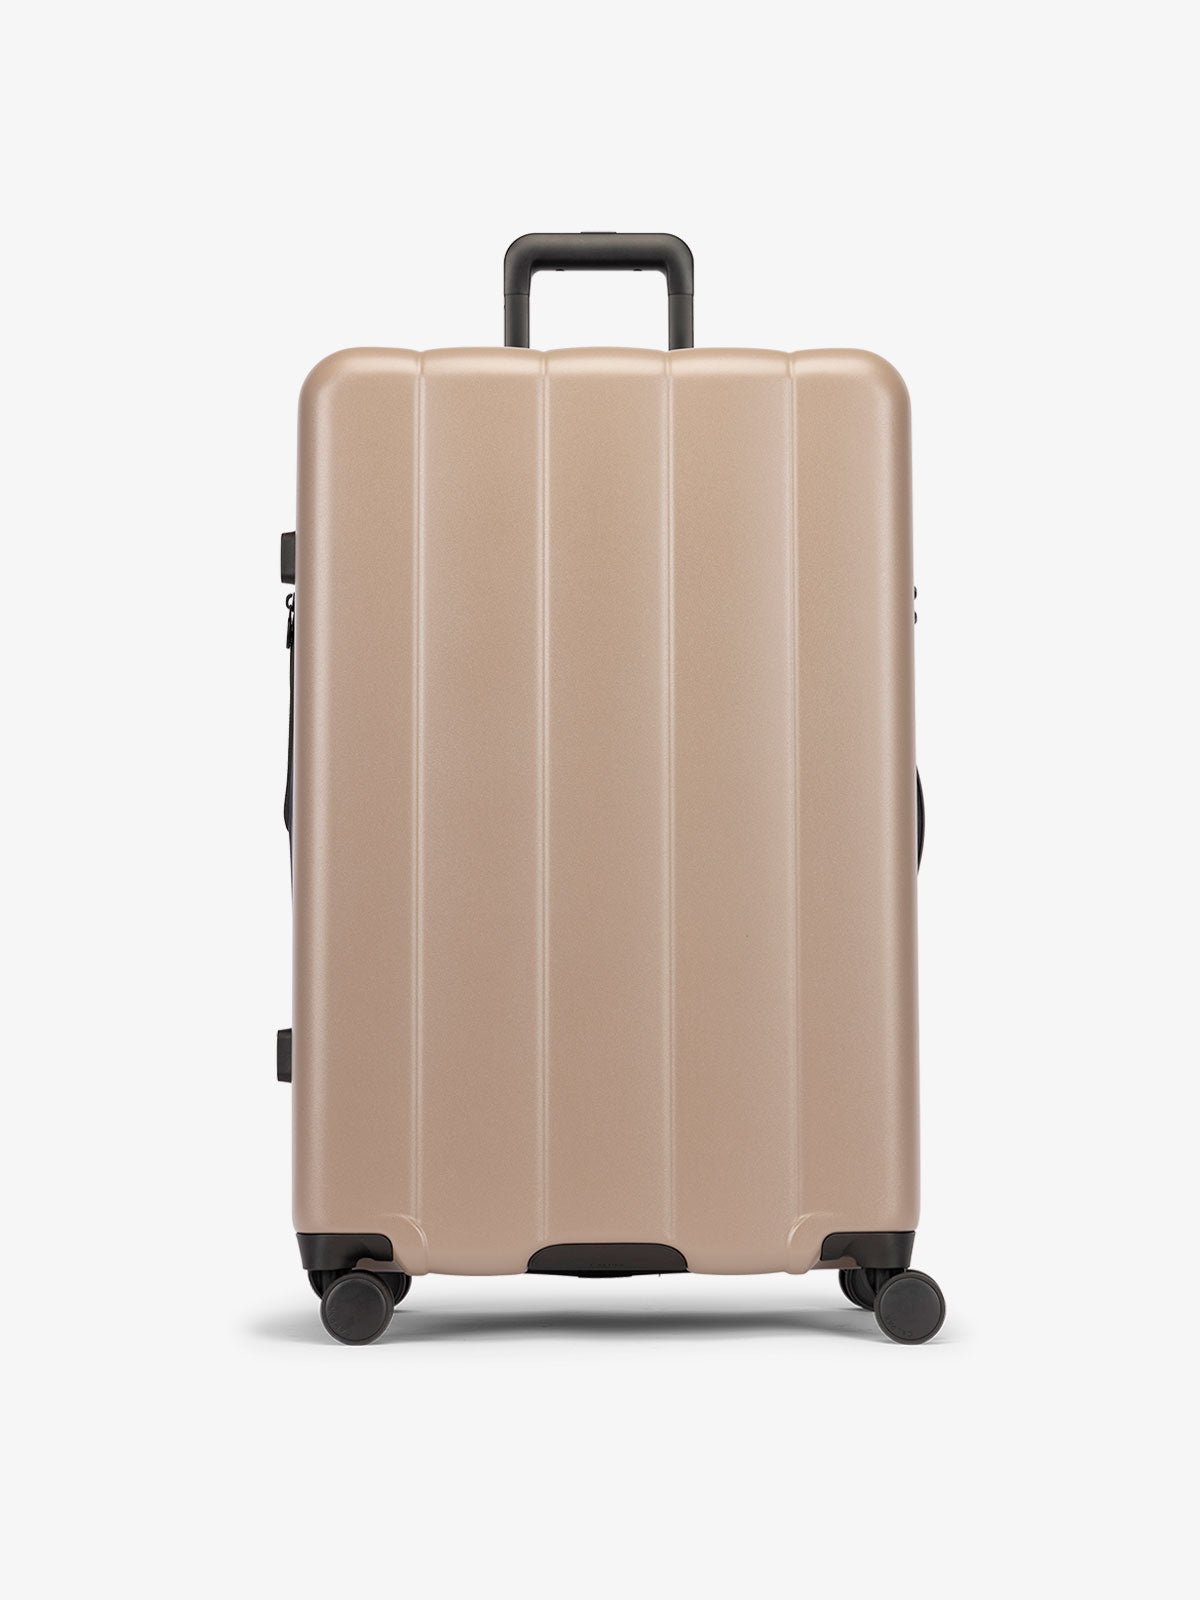 Brown chocolate large luggage made from an ultra-durable polycarbonate shell and expandable by up to 2"